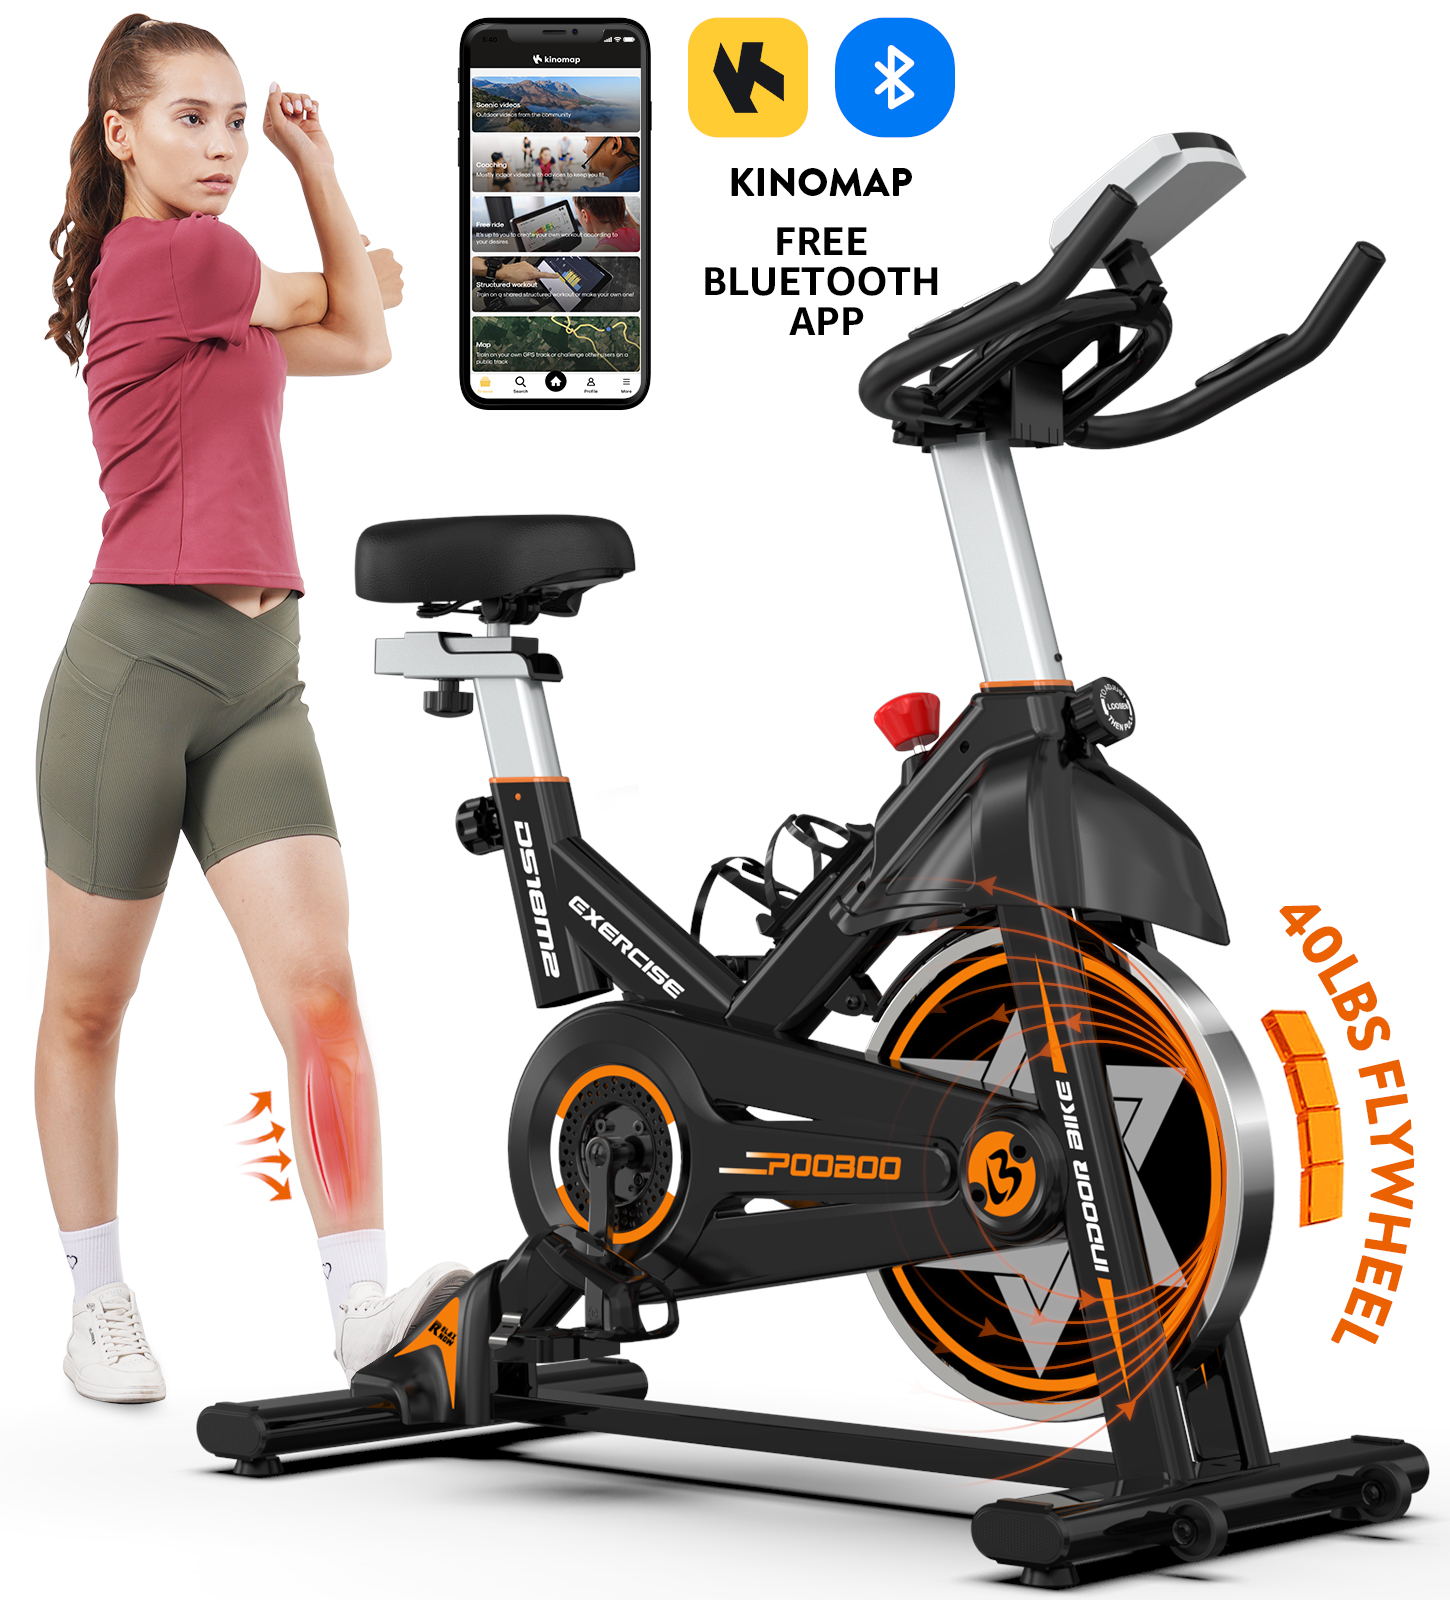 Pooboo Indoor Cycling Bike Exercise Bikes Stationary Magnetic Resistance for Home Cardio Workout Machine 350lb Flywheel 35lbs - image 1 of 10